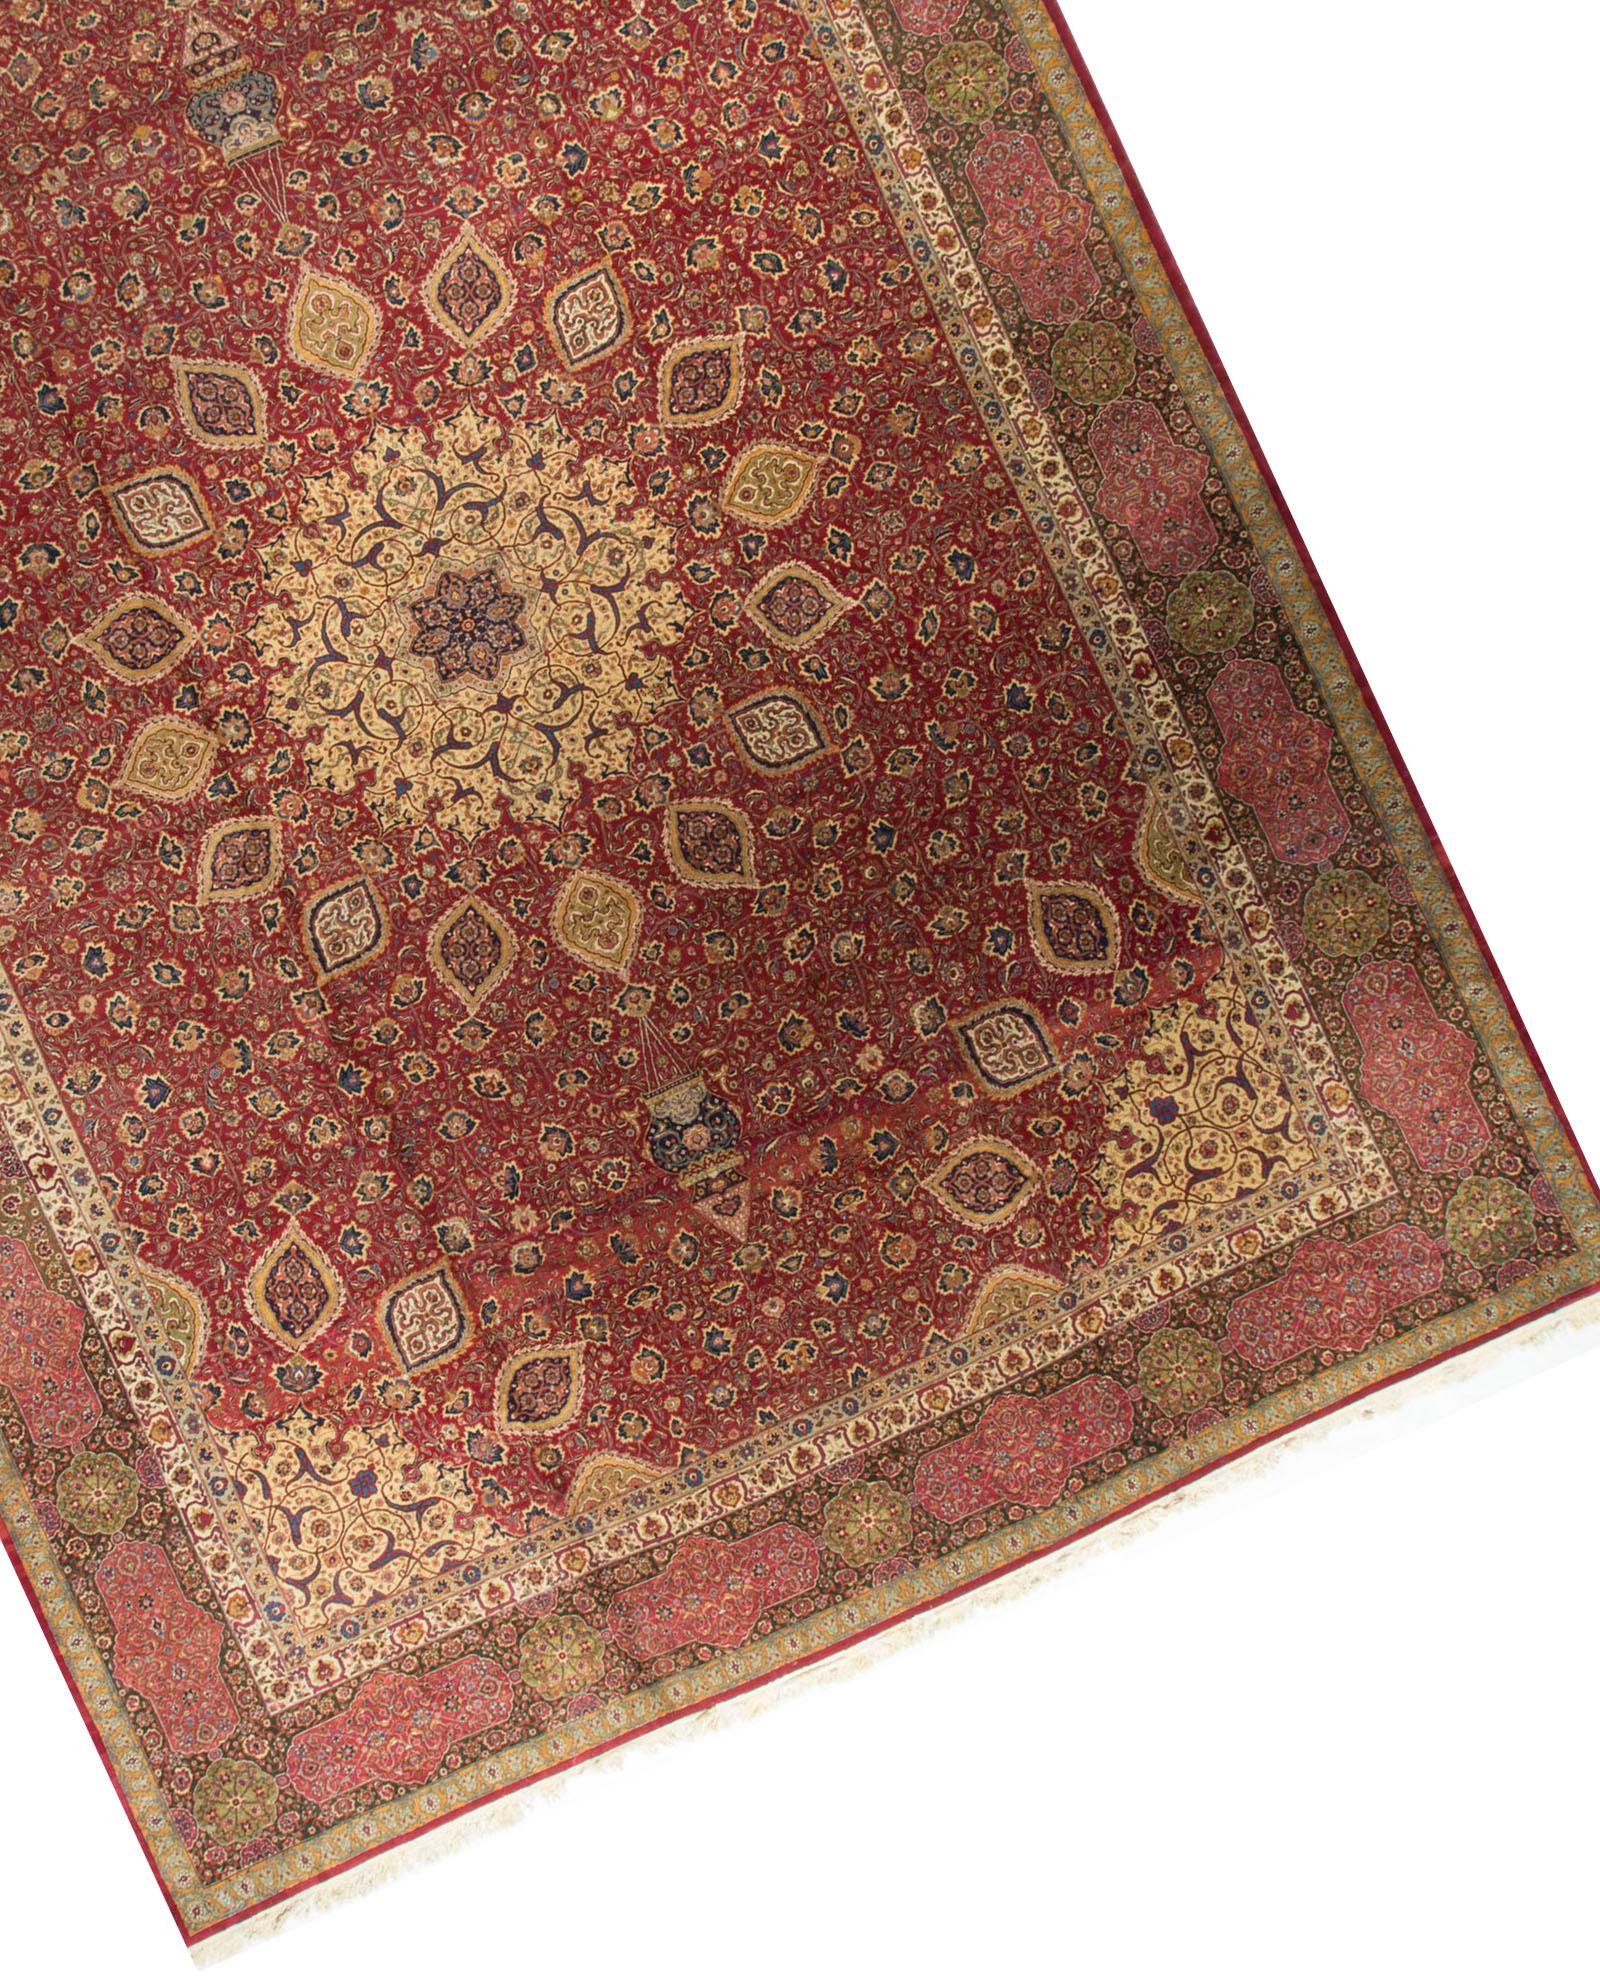 Vintage Persian oversize Tabriz rug, circa 1920. This wonderful rug has a central medallion surrounded by a serrated leaf pattern on a red ground that gives the feel of the sun bursting thru. The soft rose border helps to give the rug a light and